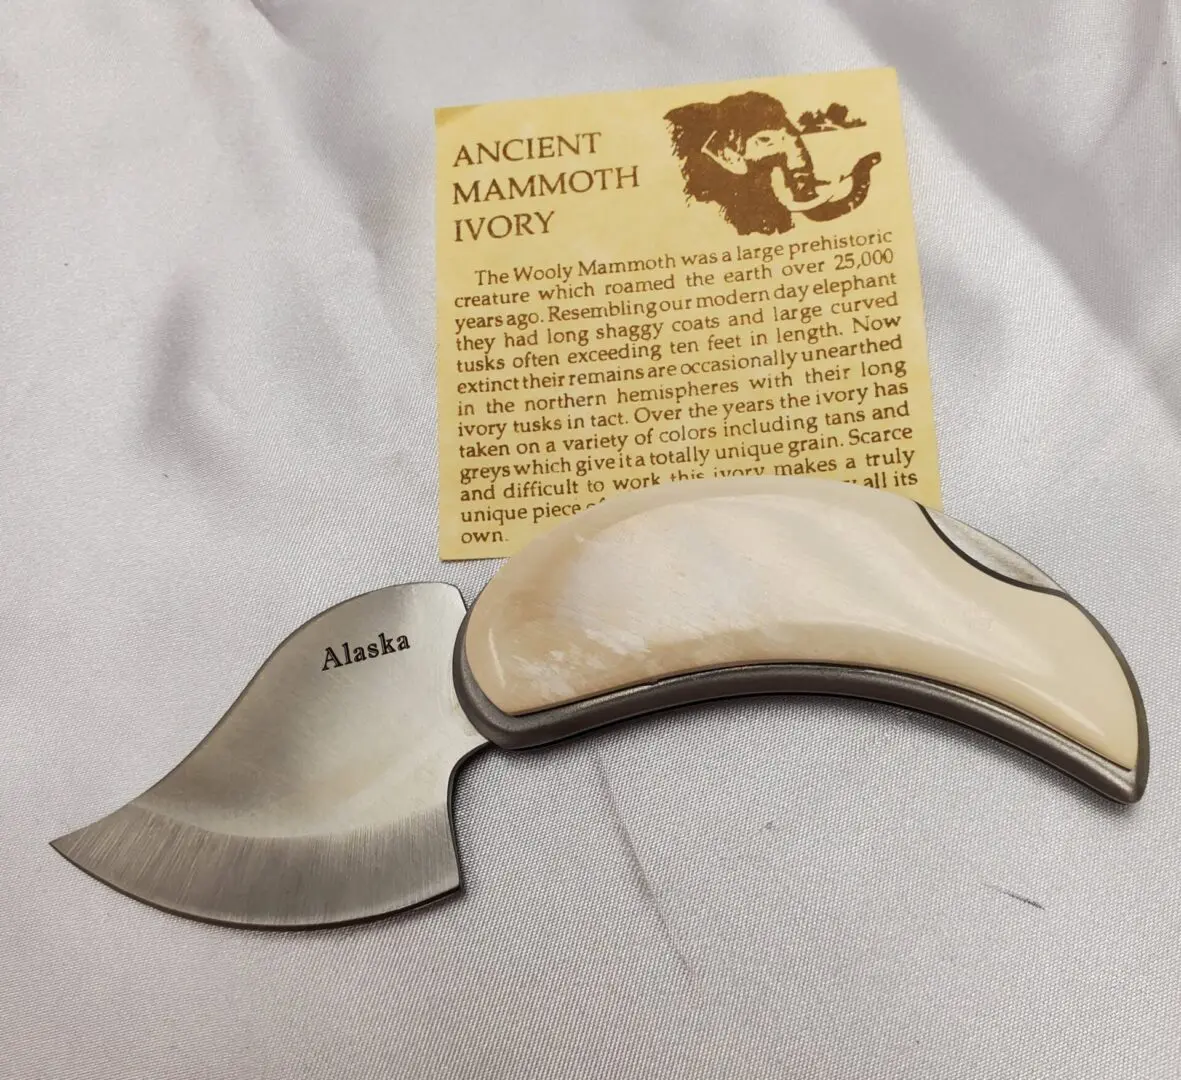 A small knife with a wooden handle and an ancient mammoth story card.